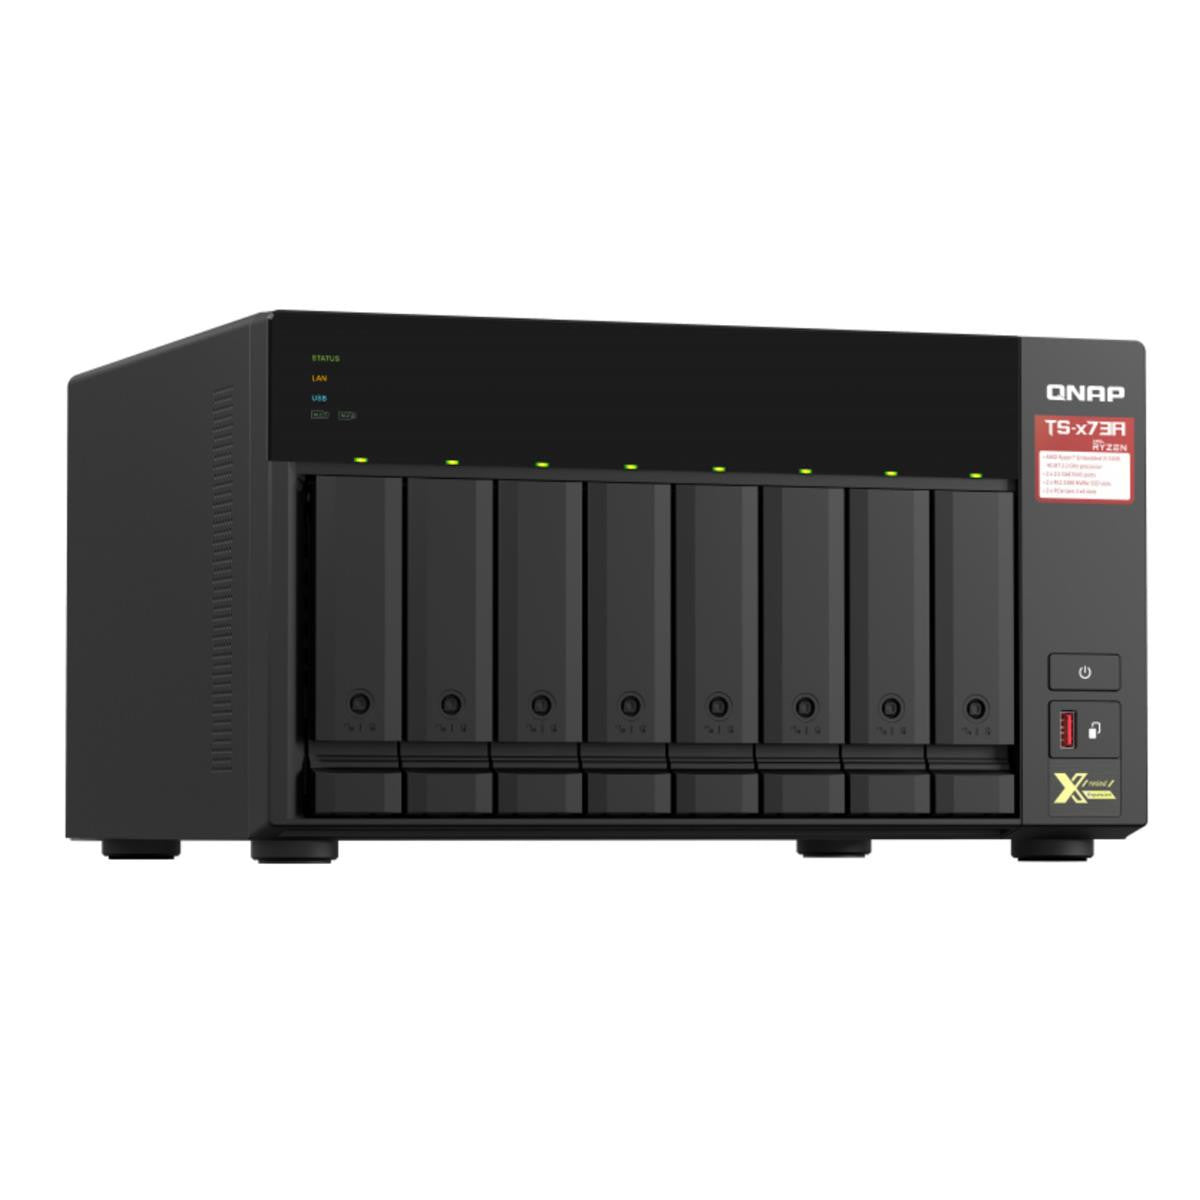 QNAP TS-873A 8-BAY NAS with 64GB DDR4 RAM and 80TB (8x10TB) Western Digital RED PLUS Drives Fully Assembled and Tested